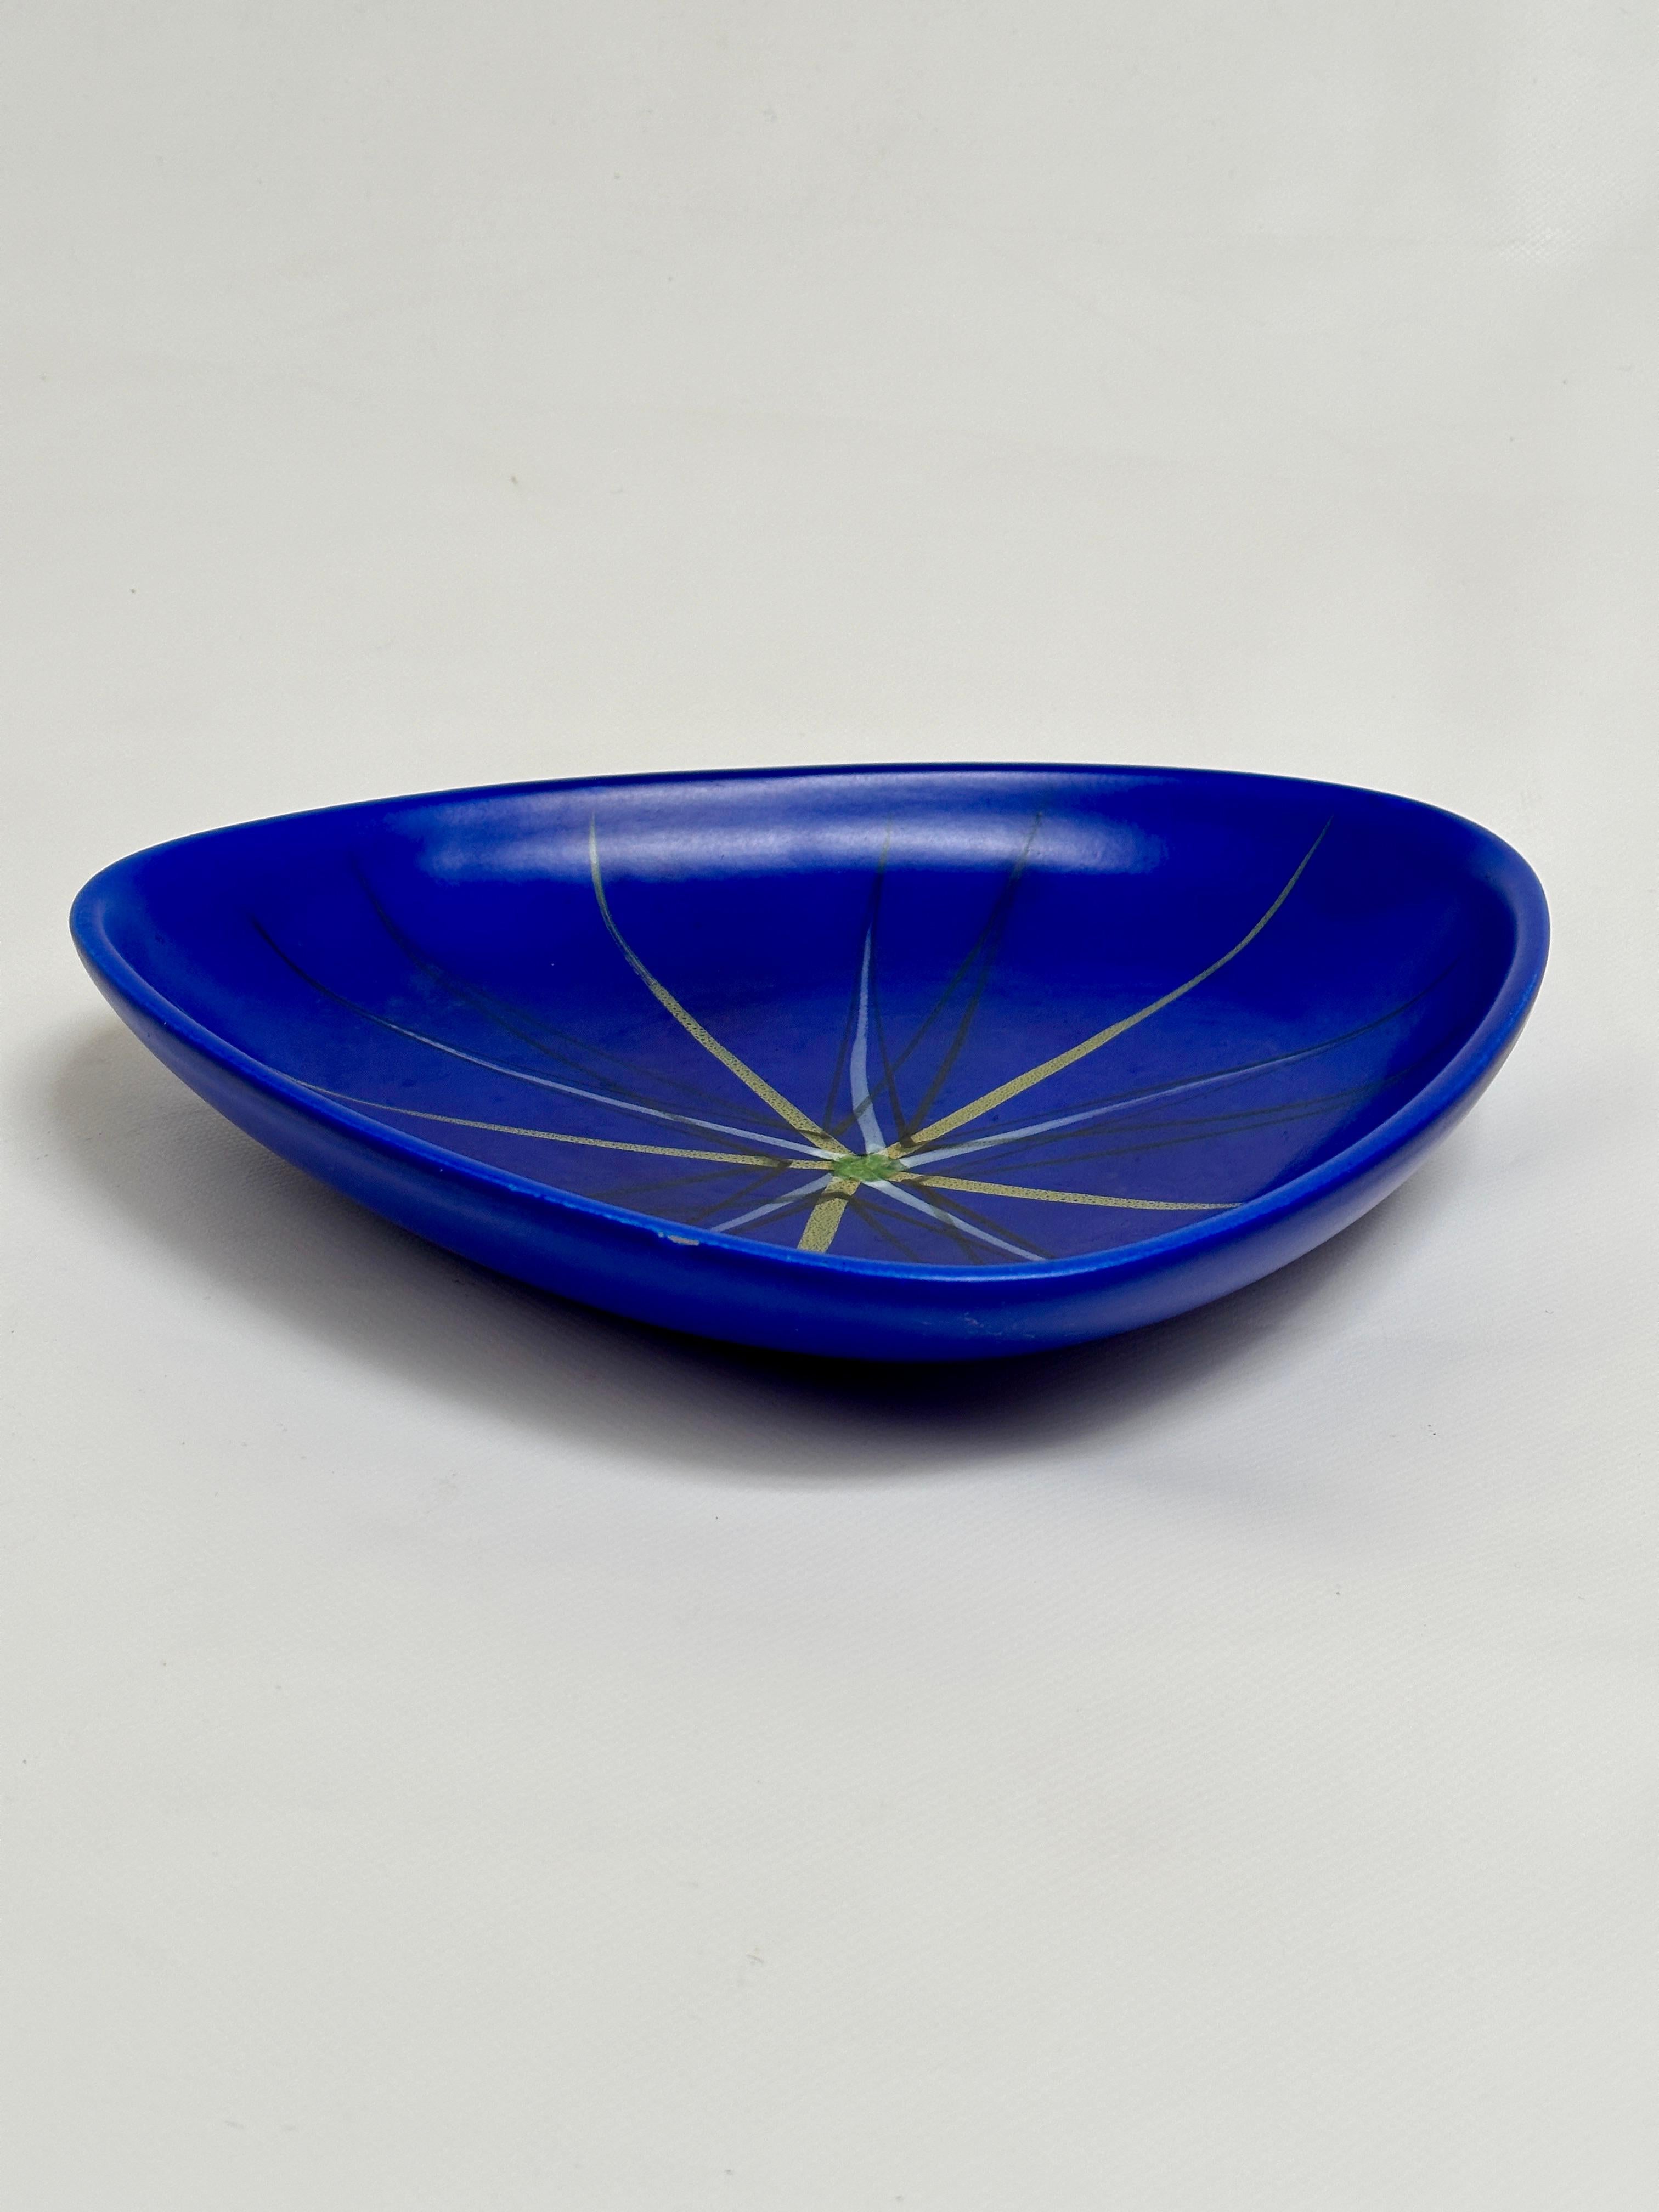 Large triangulated dish in vibrant satin blue glaze animated in its center by a stellar pattern.

André Baud is already an artist with a solid reputation when he moves to Vallauris in 1942.
He actively participates in the reputation of this artistic